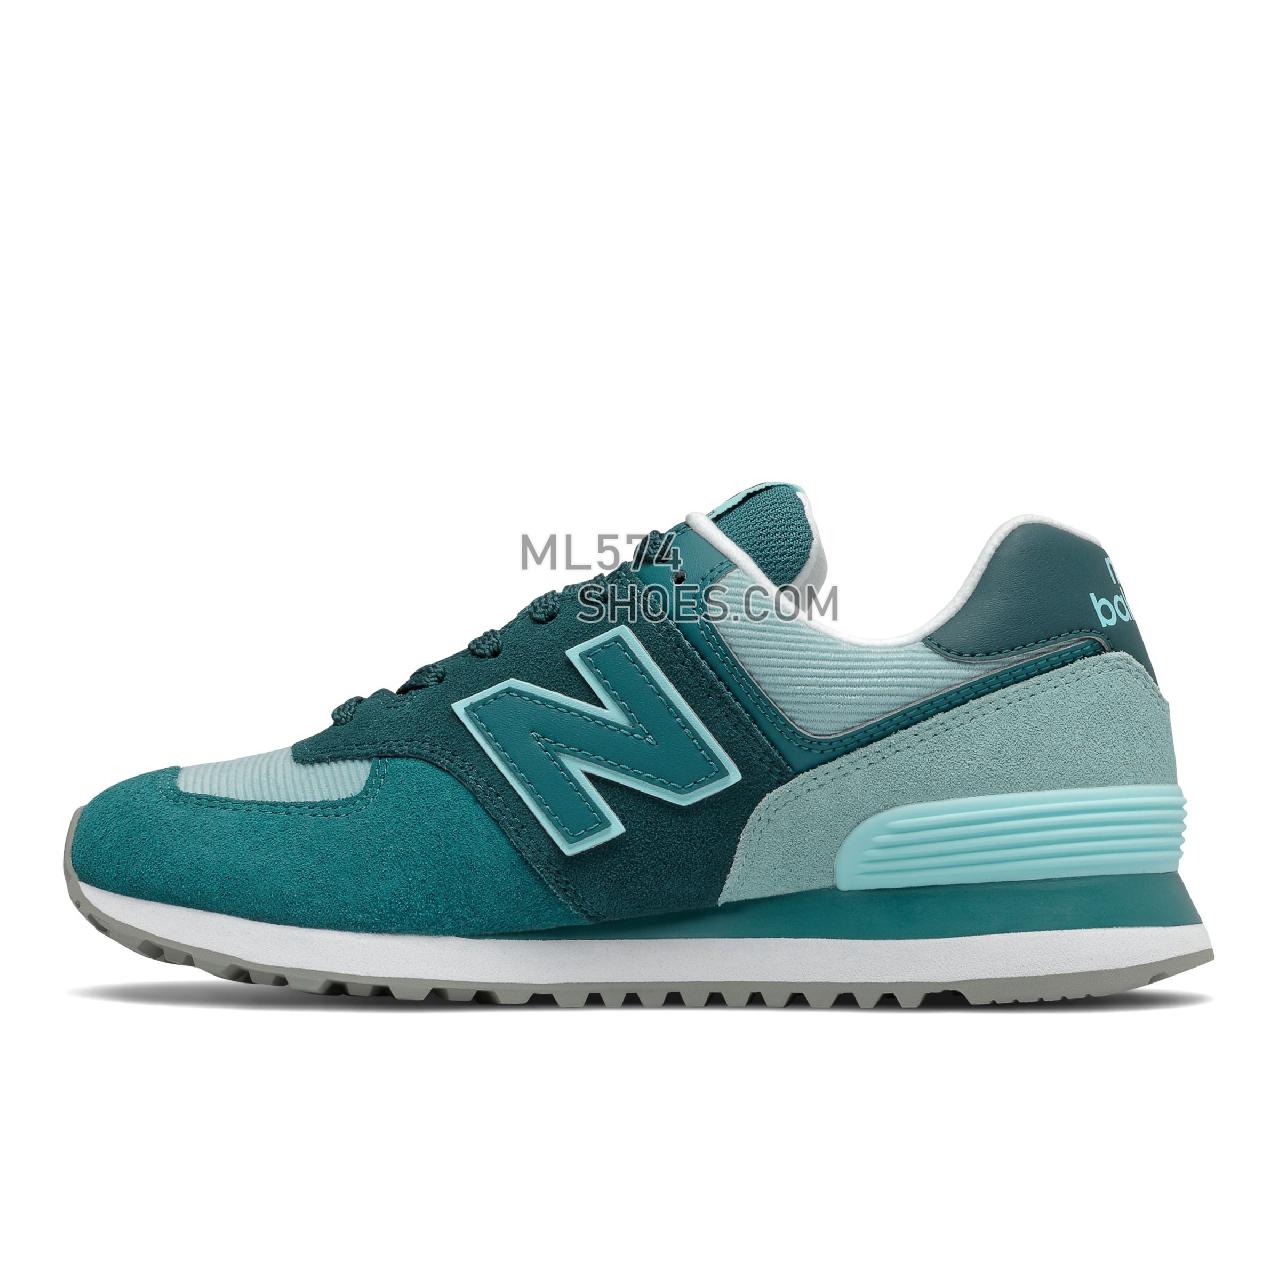 New Balance 574 - Women's Classic Sneakers - Trek with Mountain Teal - WL574WS2